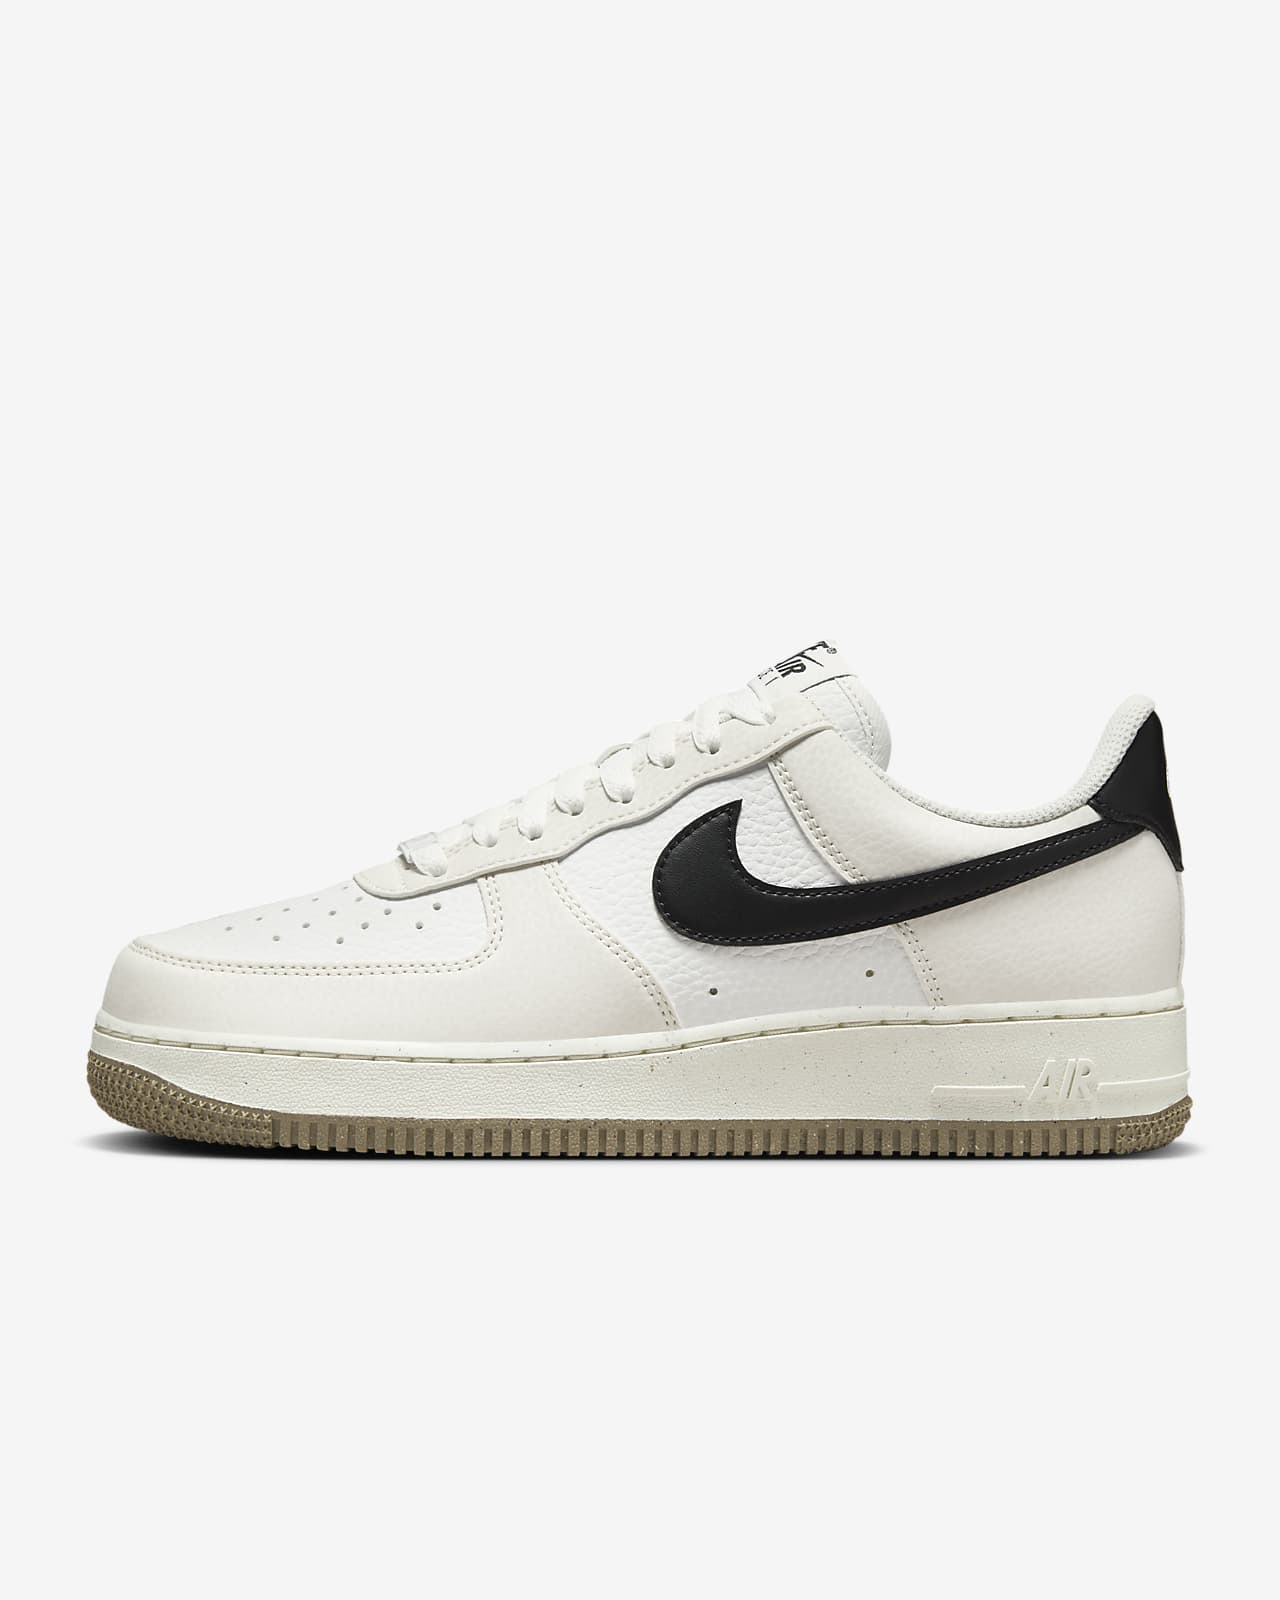 Nike Air Force 1 '07 Next Nature Women's Shoes